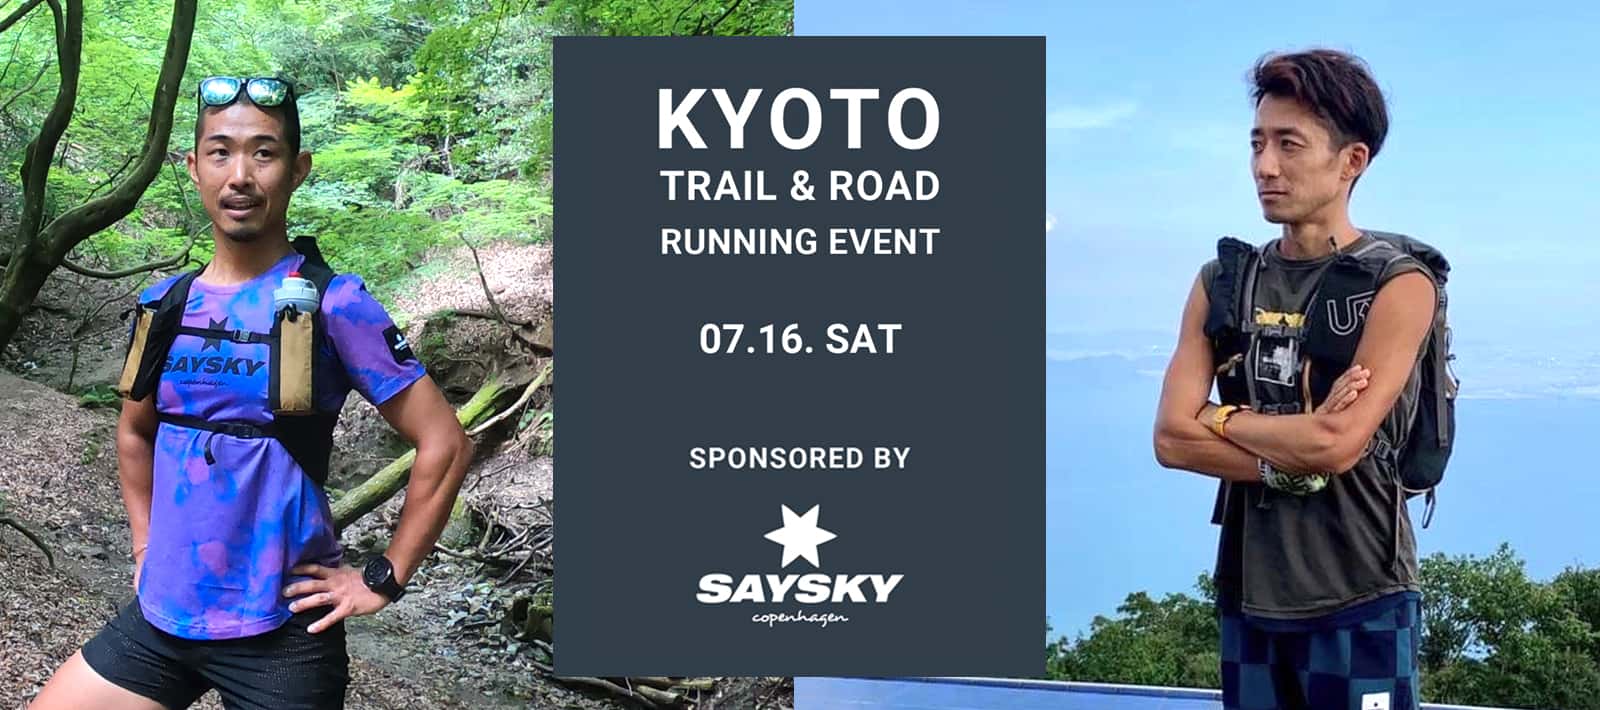 KYOTO TRAIL & ROAD RUNNING sponsored by SAYSKY